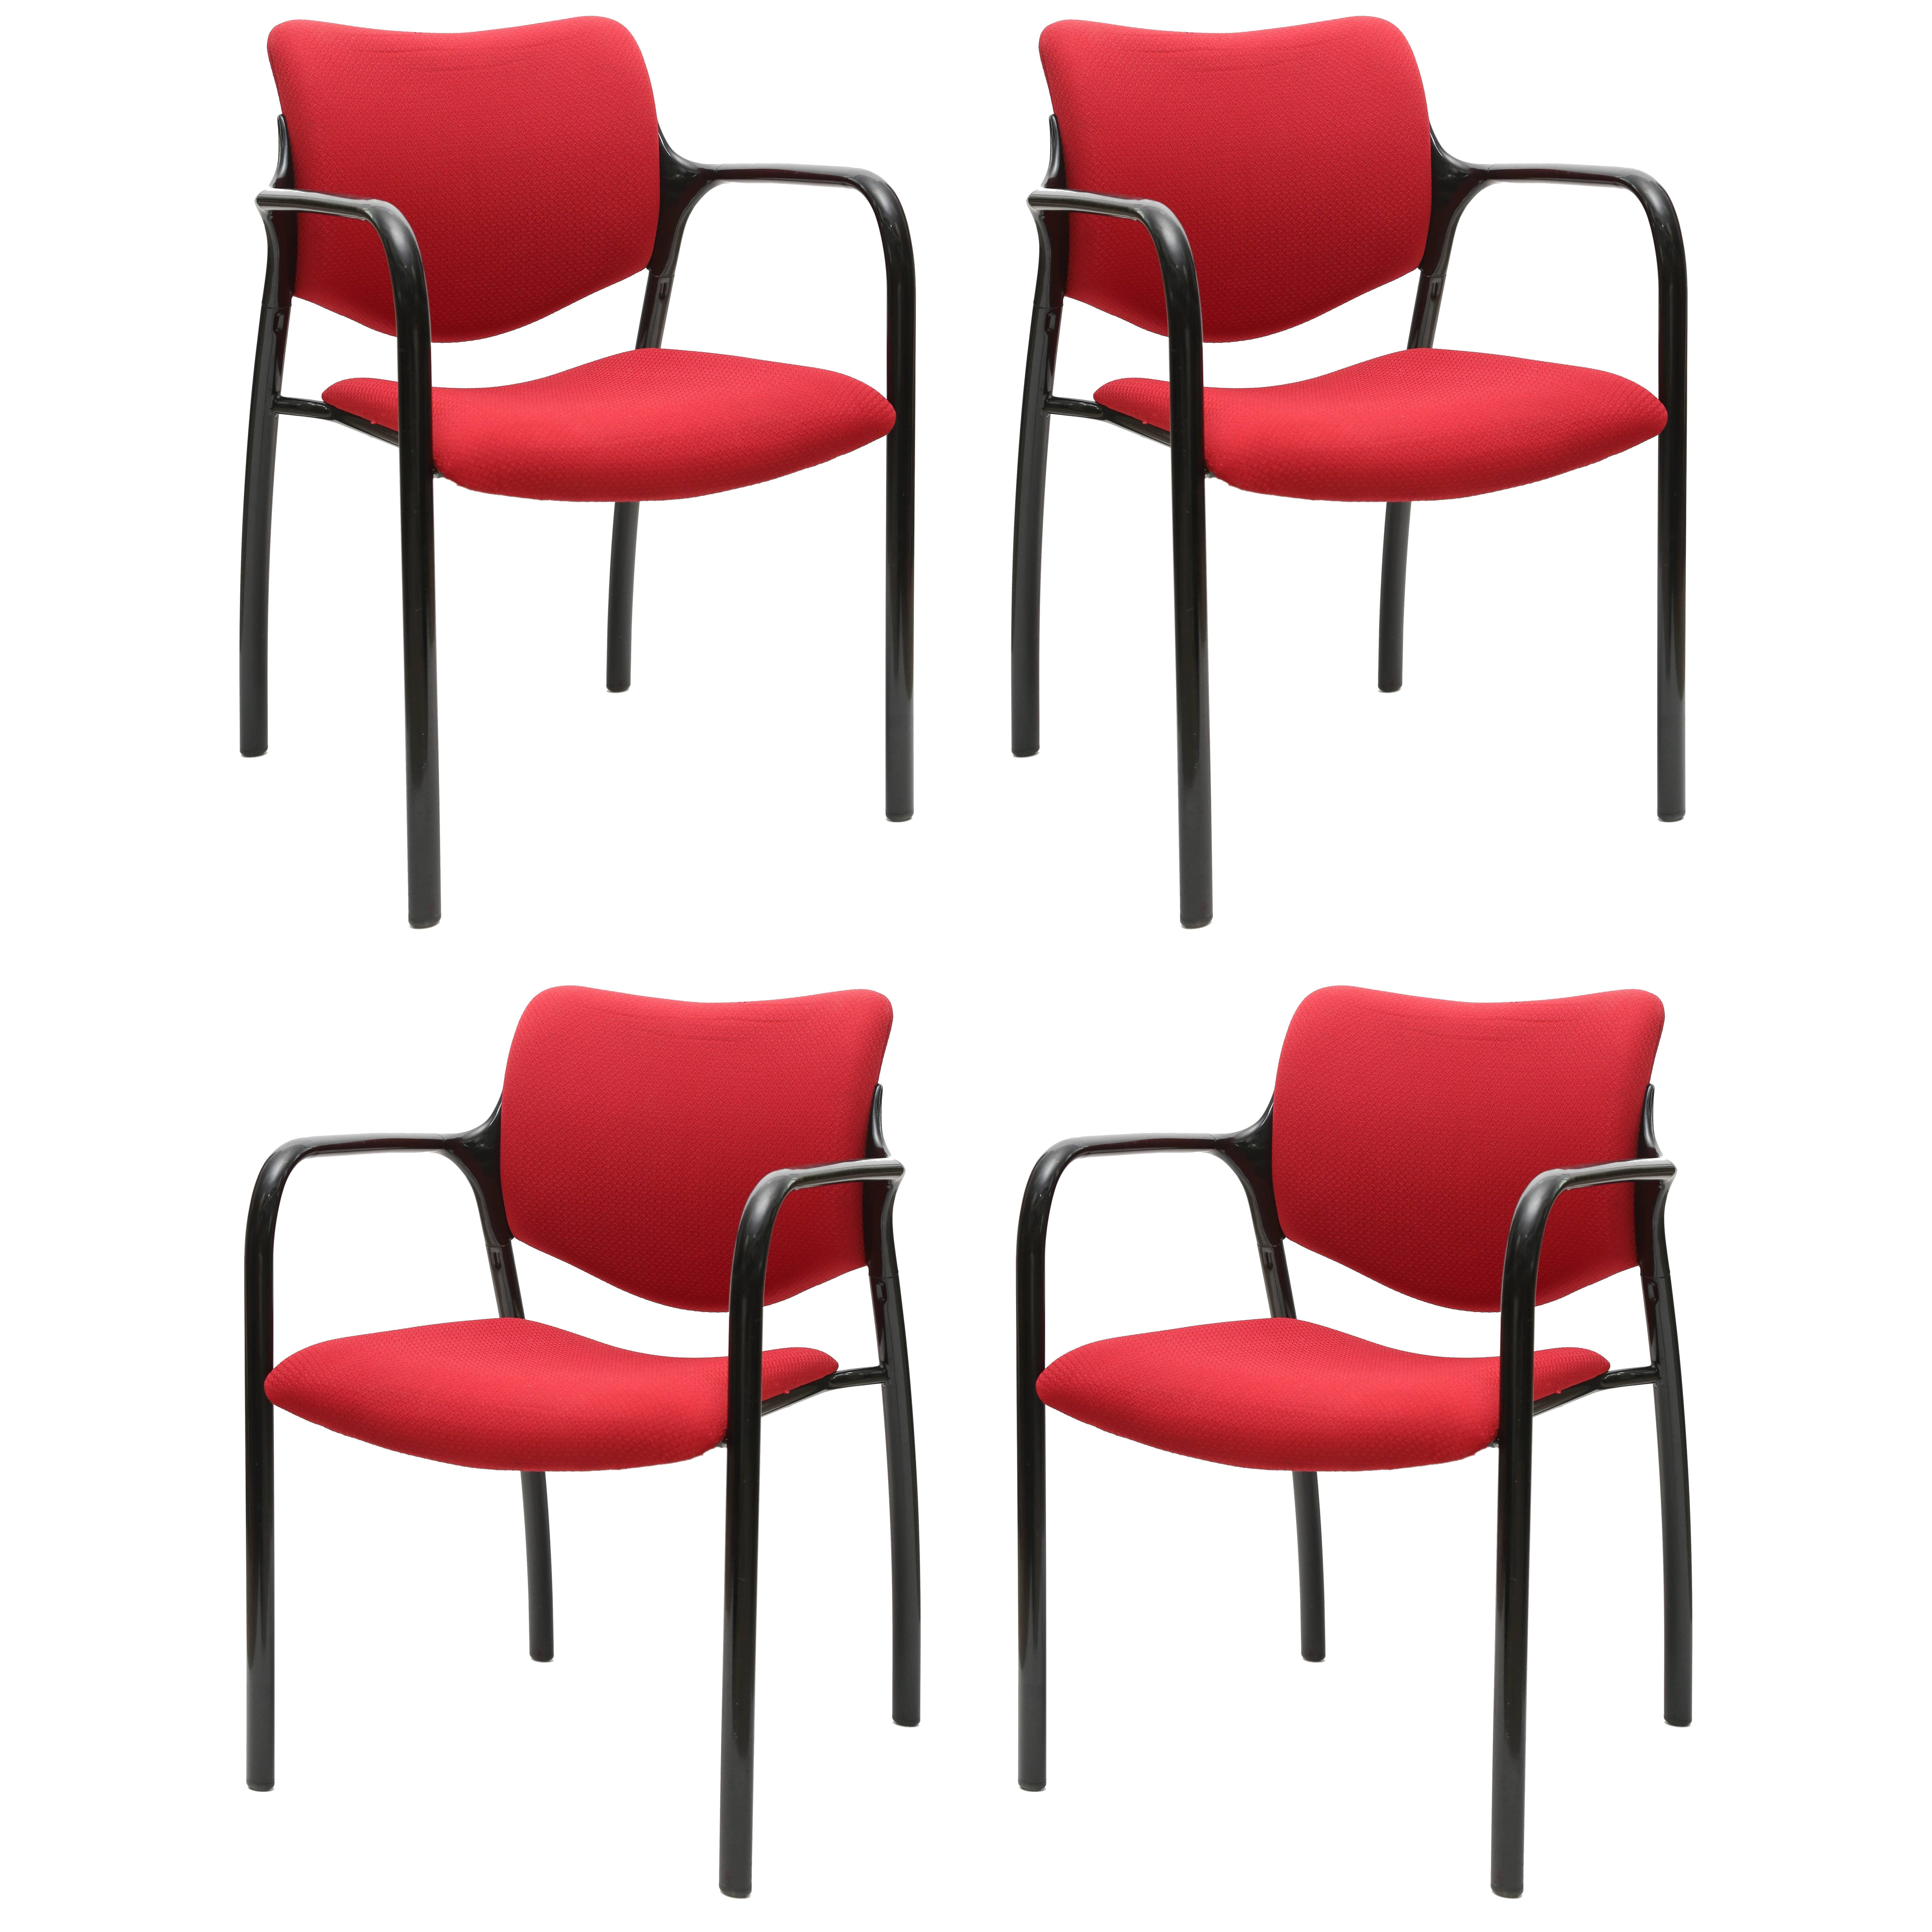 Set of Four Herman Miller Mod Chairs, 1960s, USA